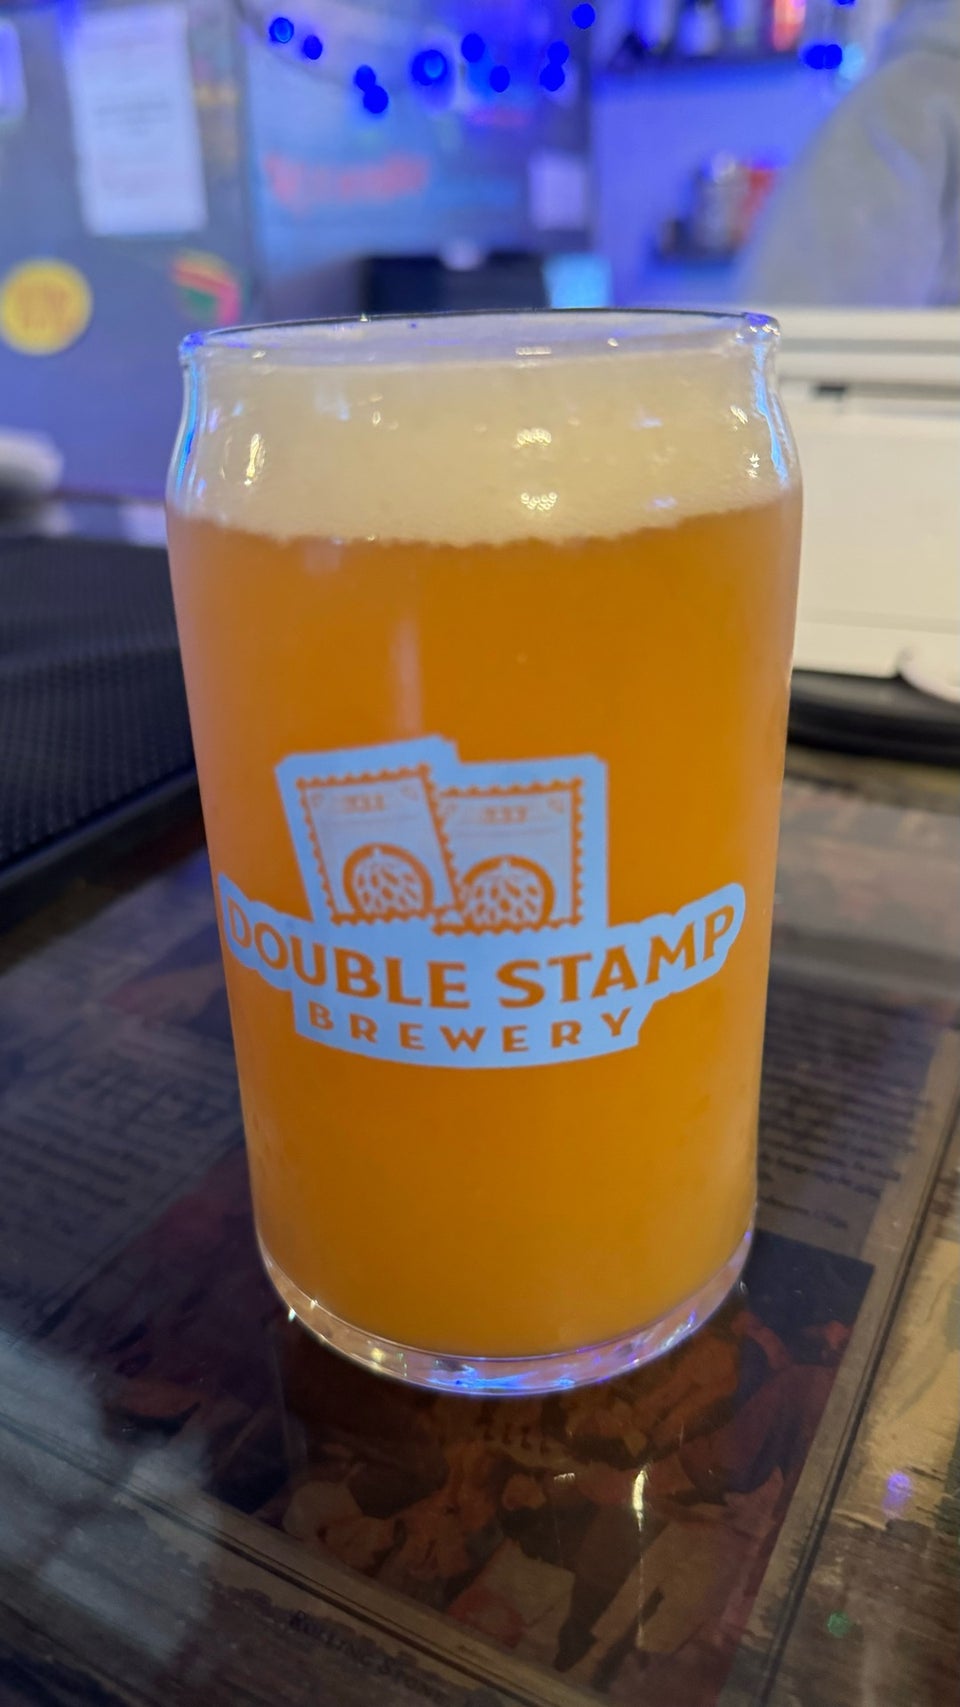 Double Stamp Brewery